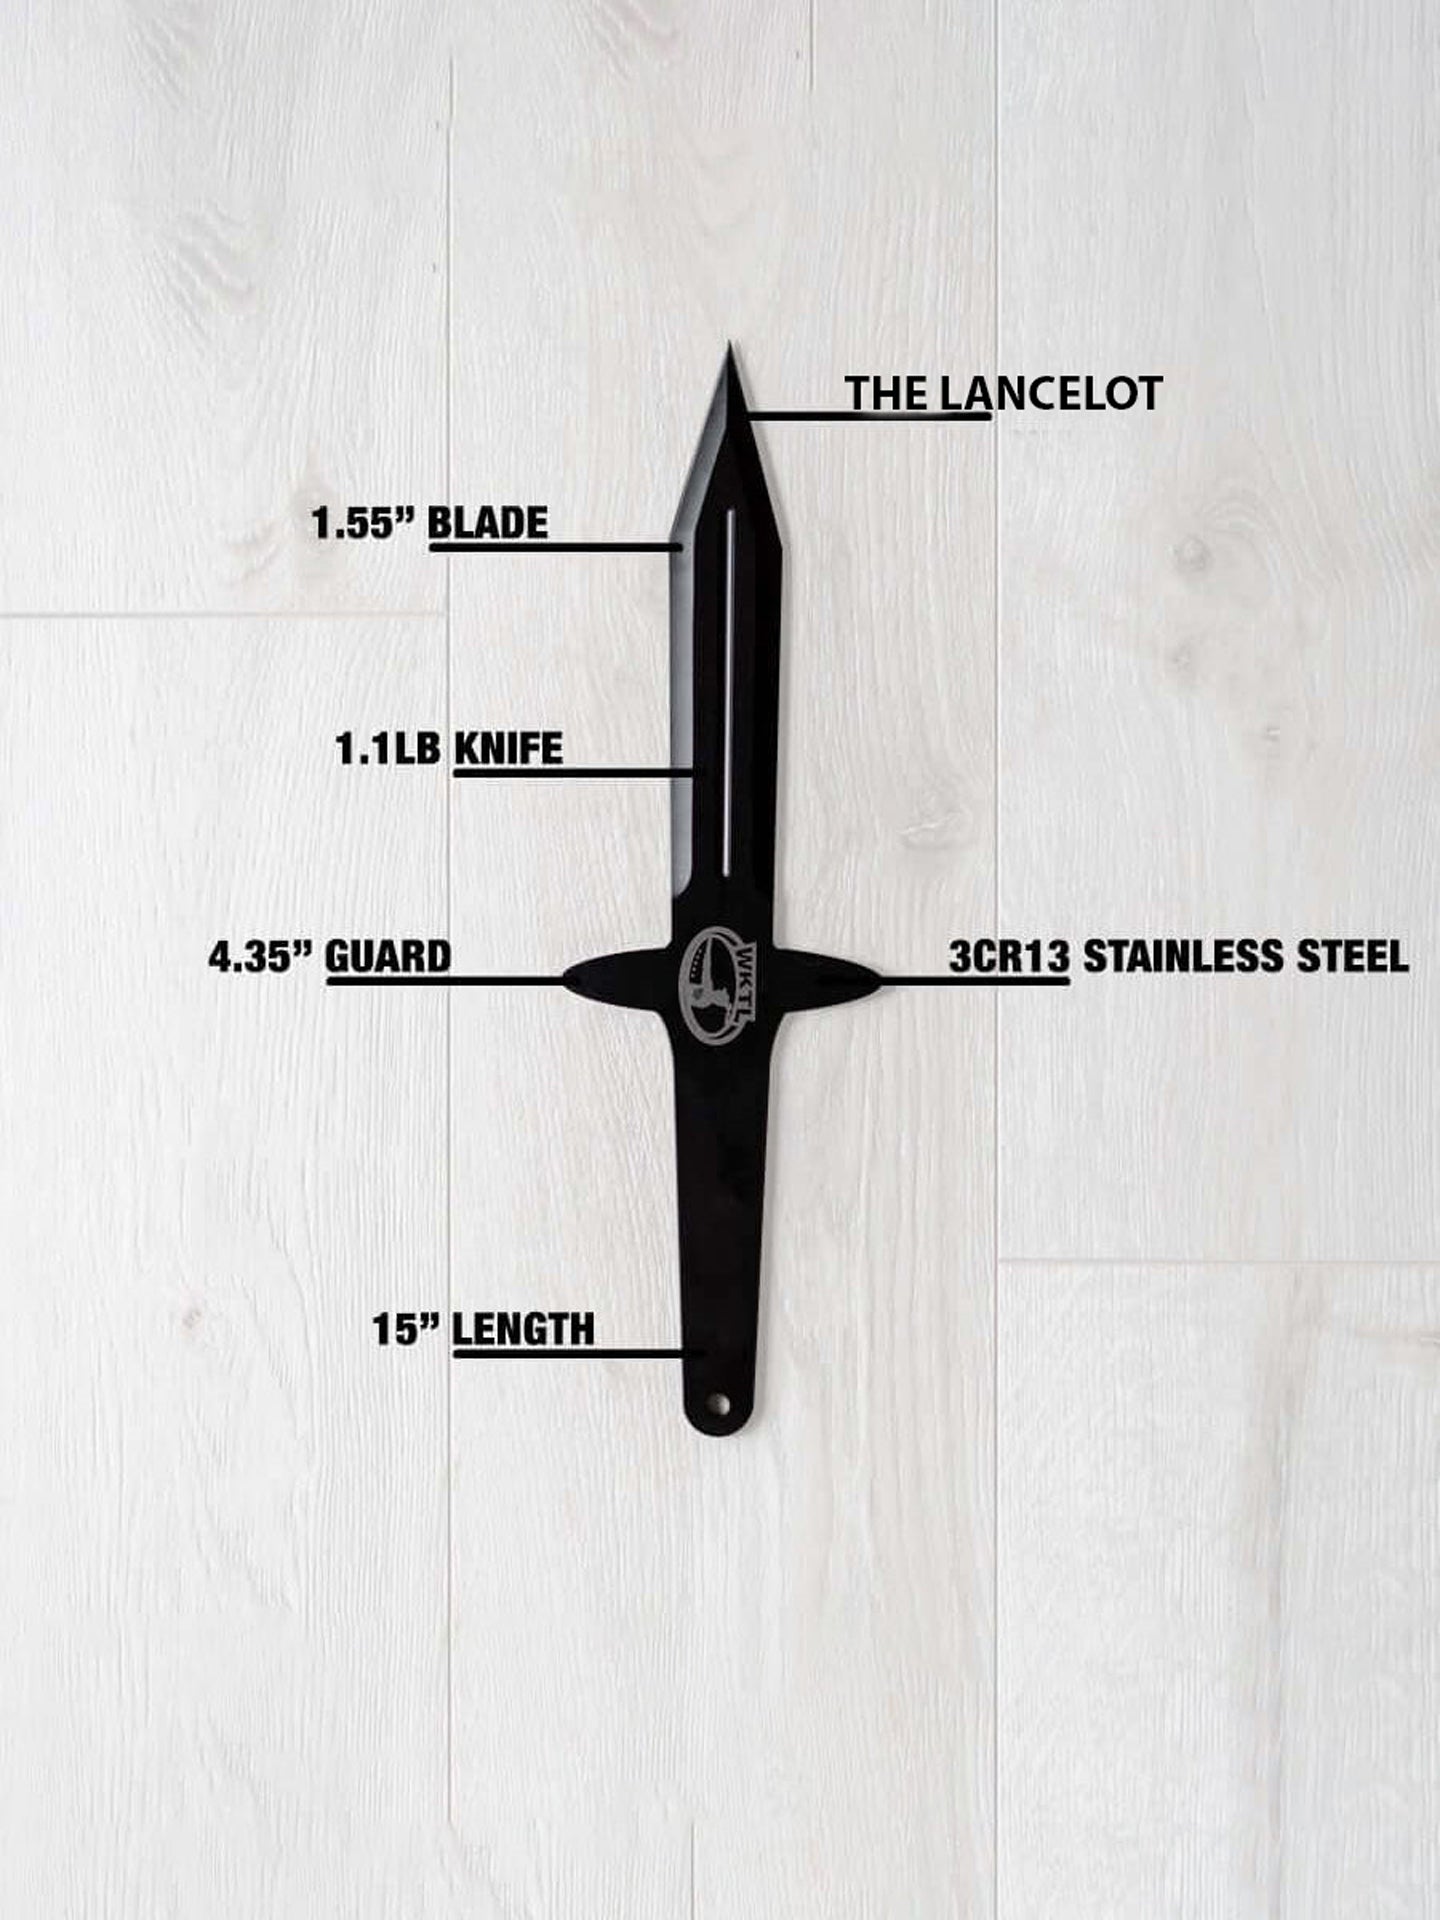 World Knife Throwing League (WKTL) Certified Competition Throwing Knife, The Lancelot Measurements